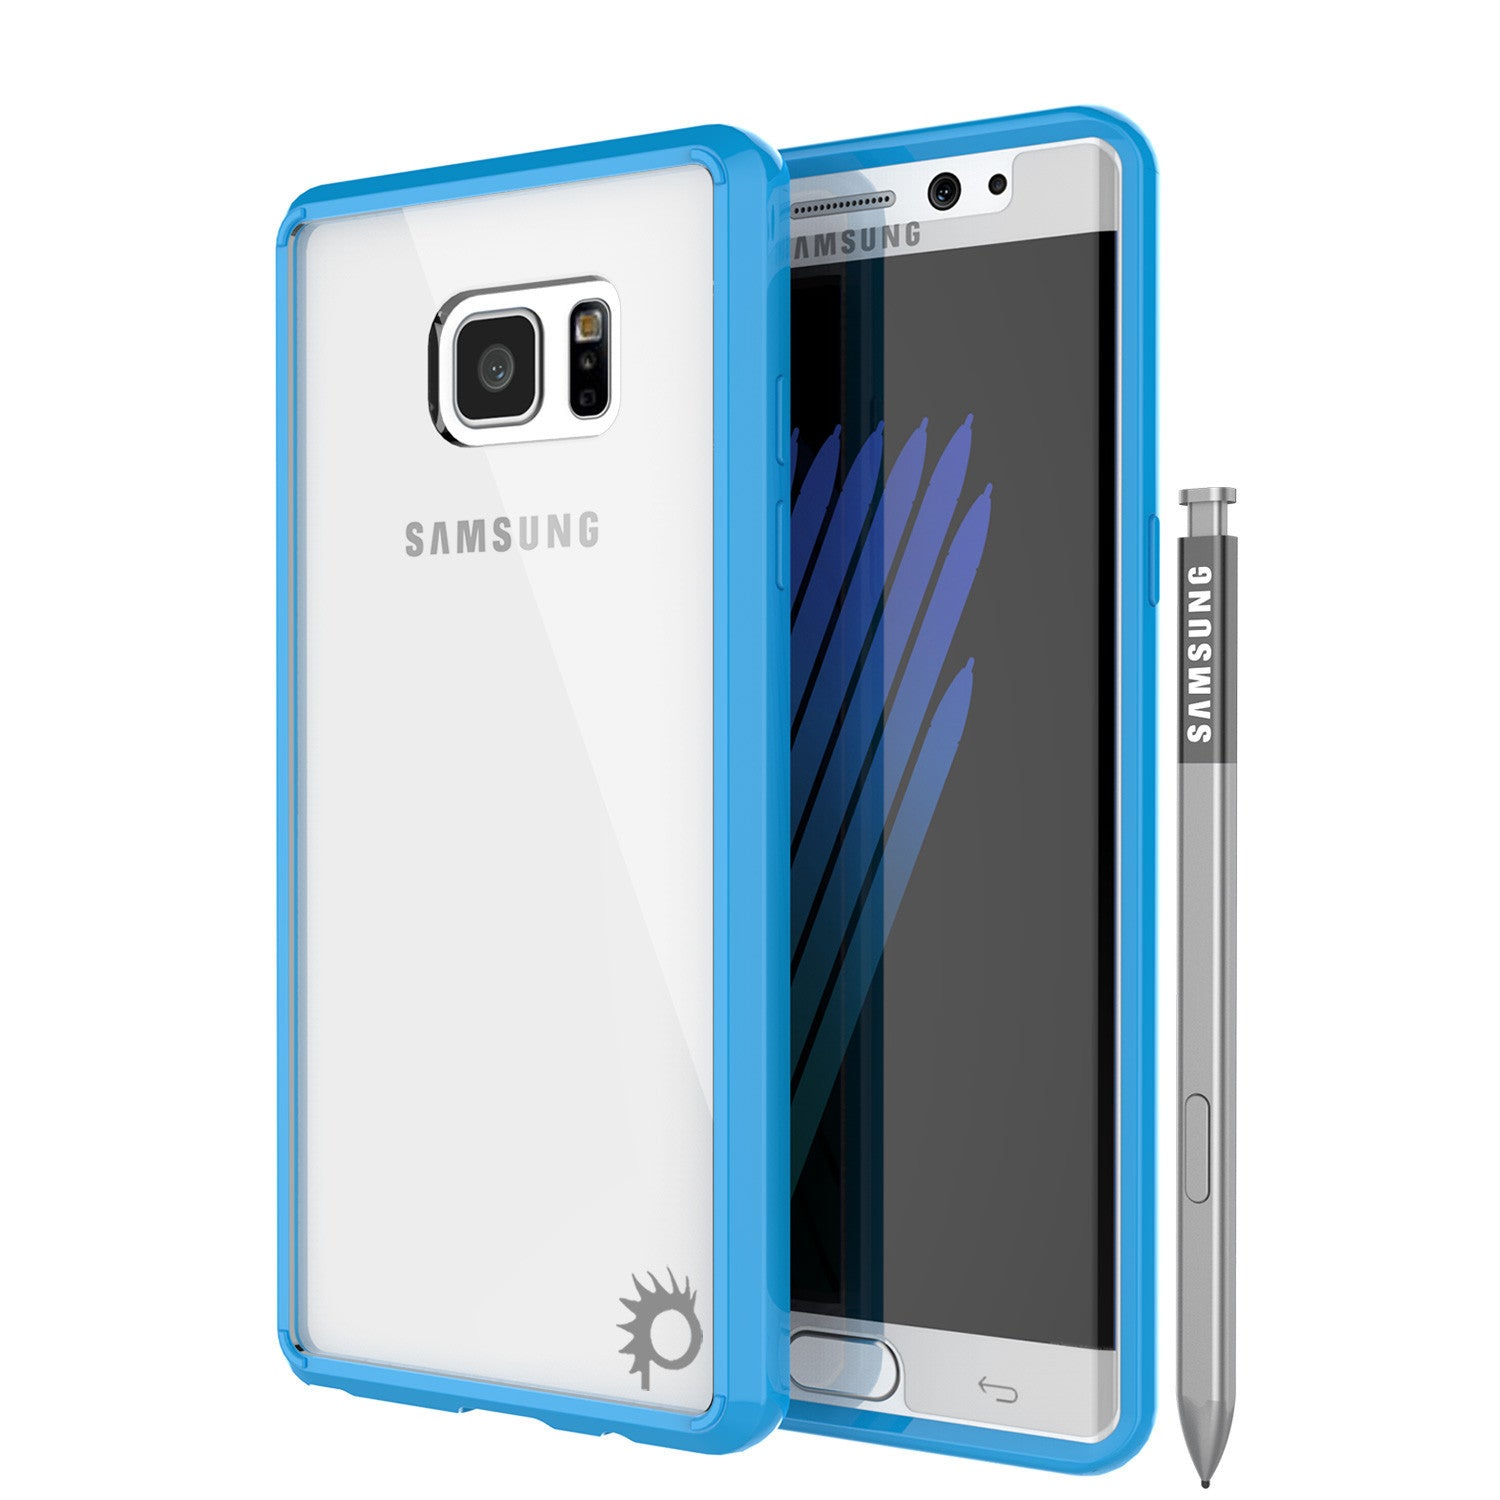 Note 7 Case Punkcase® LUCID 2.0 Light Blue Series w/ PUNK SHIELD Screen Protector | Ultra Fit (Color in image: light blue)